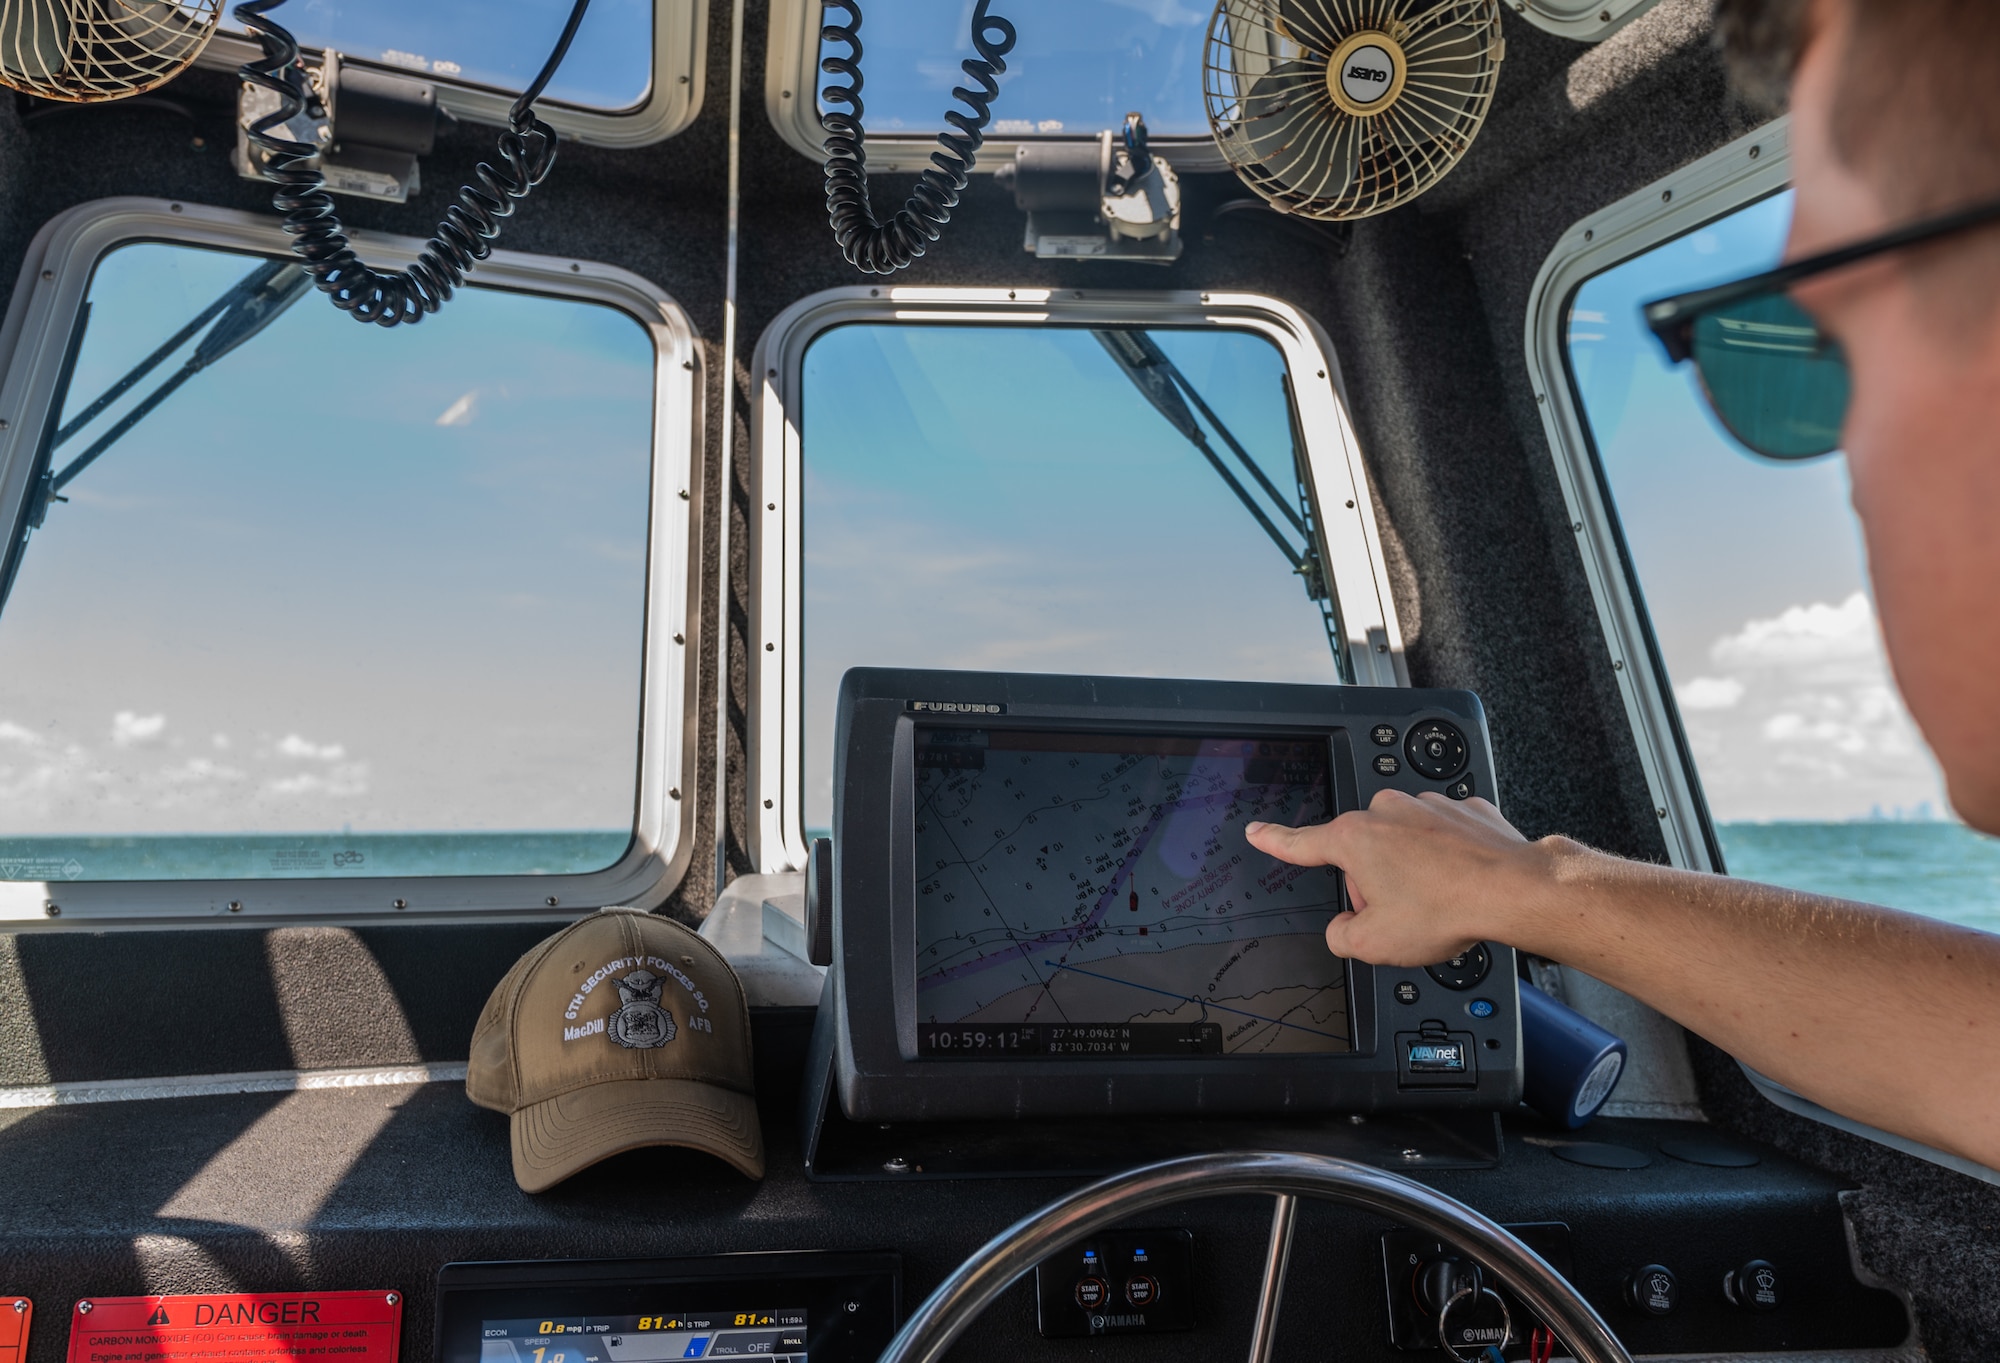 U.S. Air Force Airman 1st Class Sabin Venable, a marine patrolman assigned to the 6th Security Forces Squadron points out the rescue location on a Global Positioning System in Tampa Bay, Florida, July 10, 2022. On June 12, marine patrolmen Airman 1st Class Samari Rivera-Rodriguez, Kade Jones, and Sabin Venable, along with Staff Sgt. William Au rescued eight victims who were stranded on top of a capsized vessel in Tampa Bay while on patrol. The 6th SFS Marine Patrol unit is the only fully operational, 24/7 unit in the Air Force, and is responsible for protecting one of the largest coastal restricted areas in the Department of Defense. (U.S. Air Force photo by Staff Sgt. Alexander Cook)